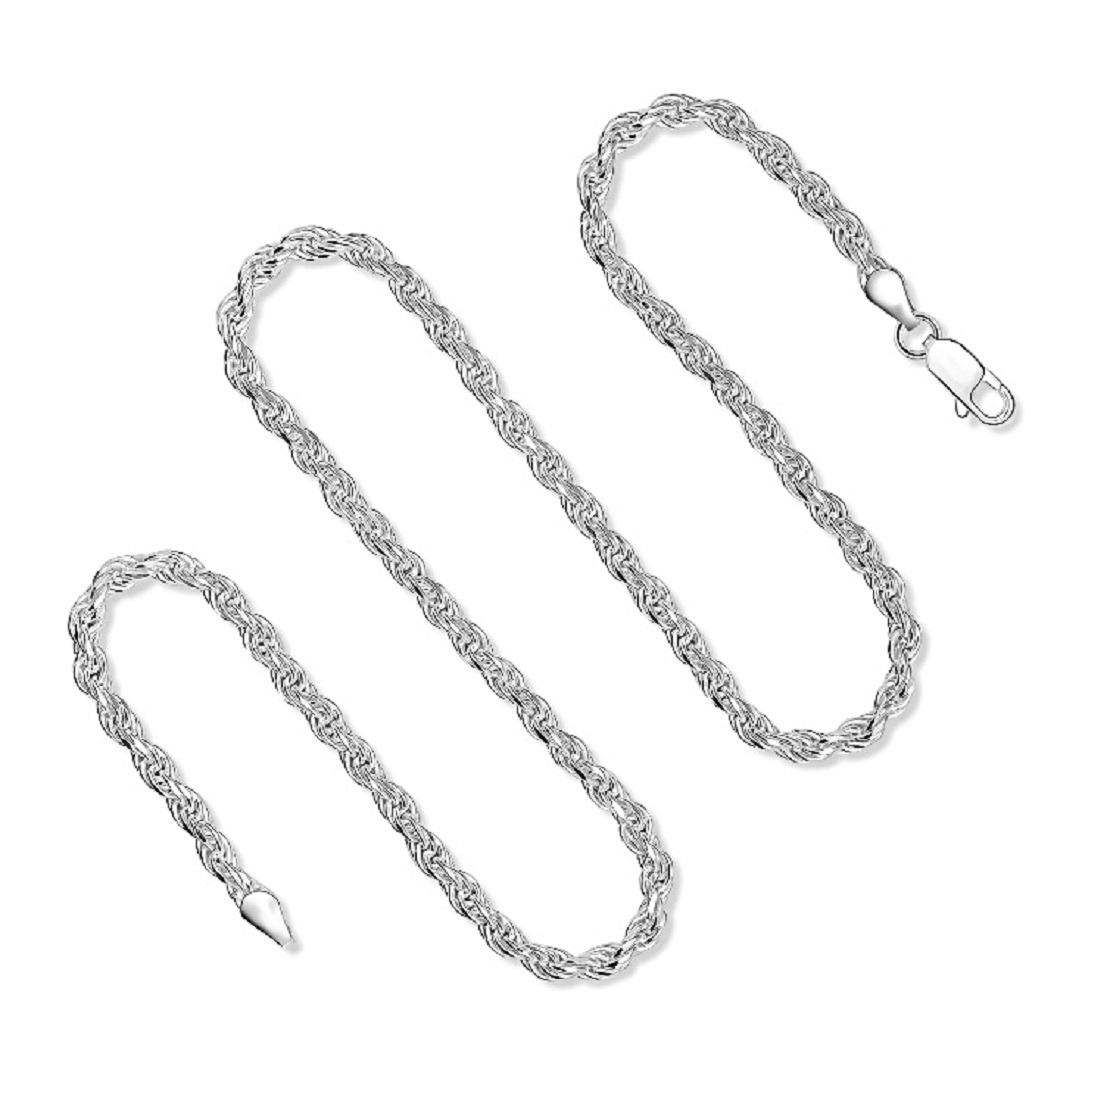 Unisex Rope Chain in Pure 92.5 Sterling Silver - 30 Inches - Parnika